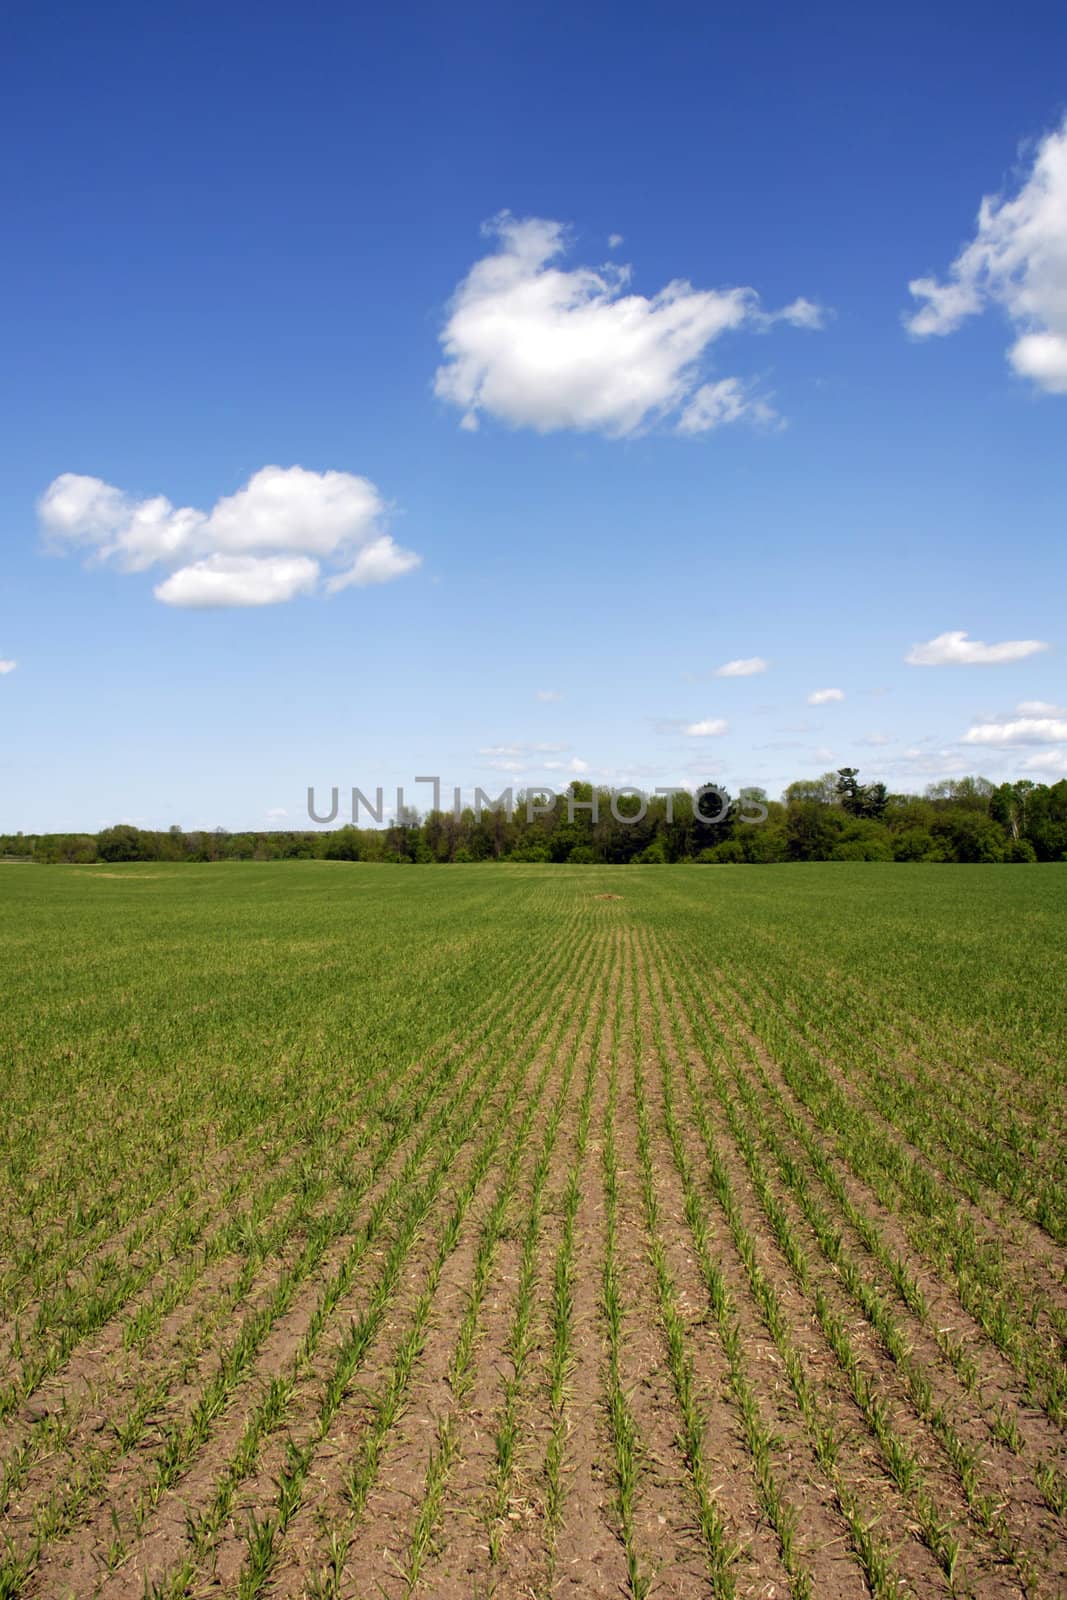 Field with corn seedlings in spring - deep blue sky with wispy white clouds.